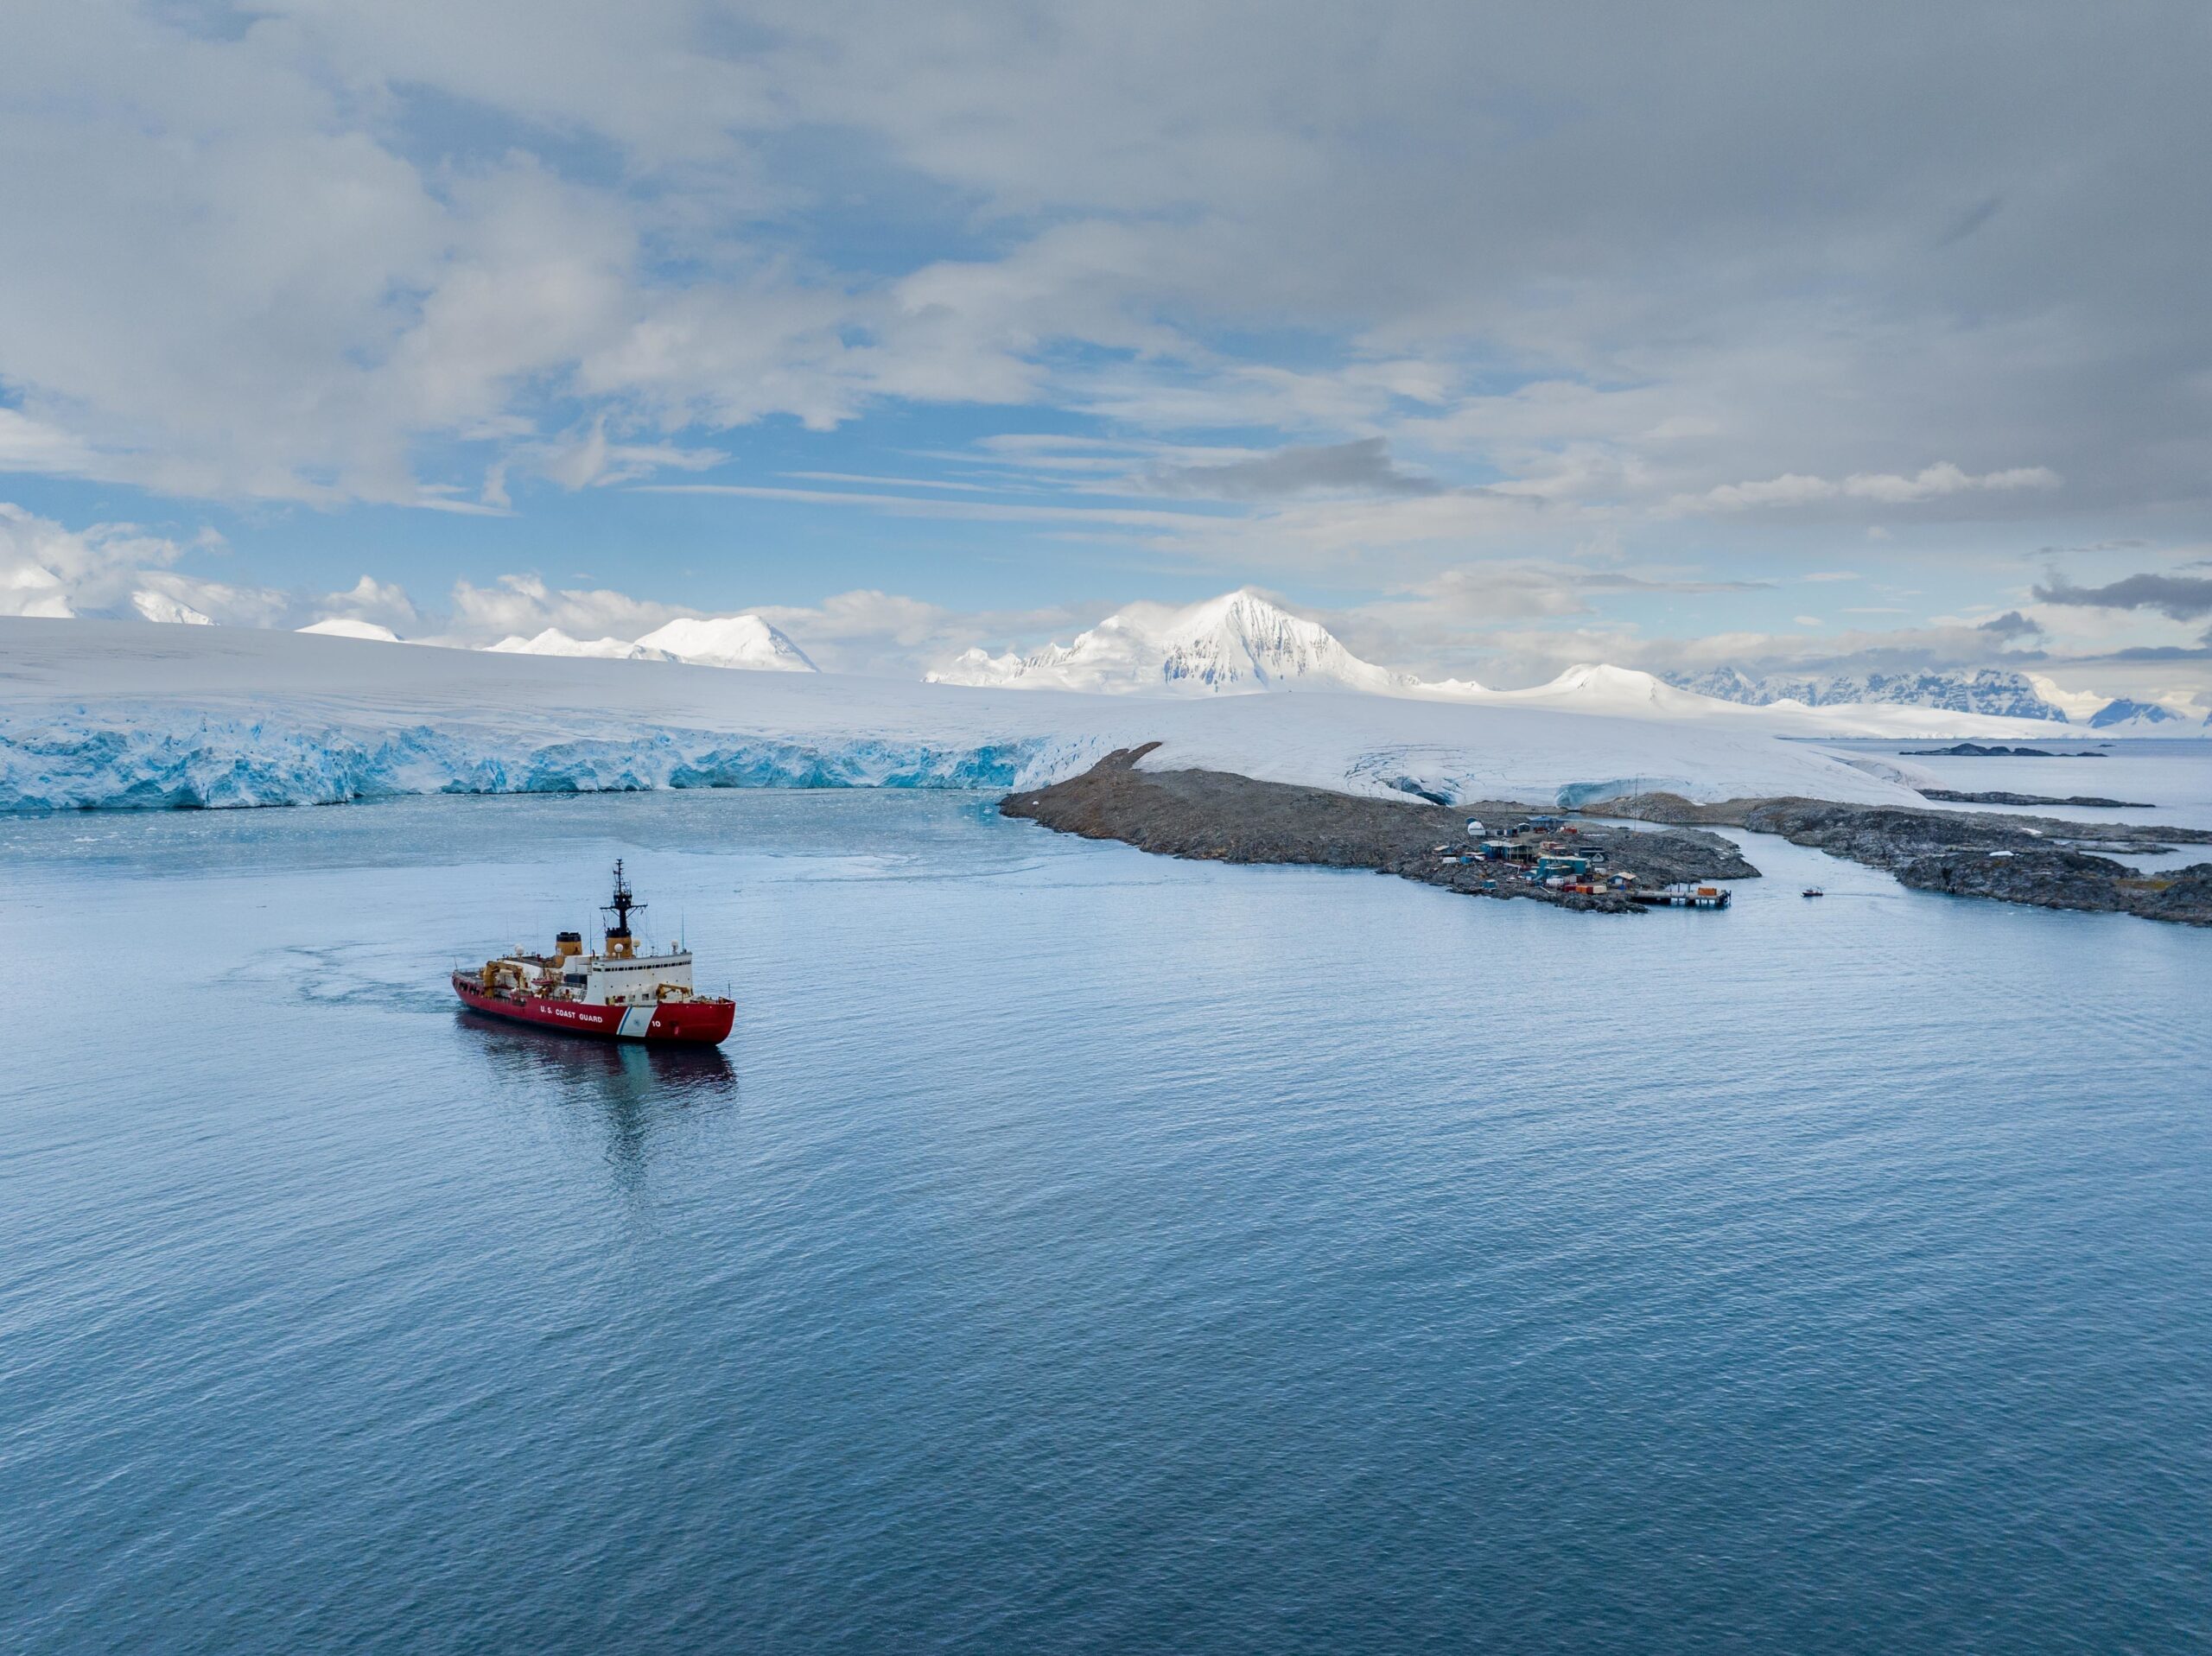 Coast Guard Cutter Polar Star (WAGB 10) visiting Palmer Station, a US research station on the Antarctic peninsula